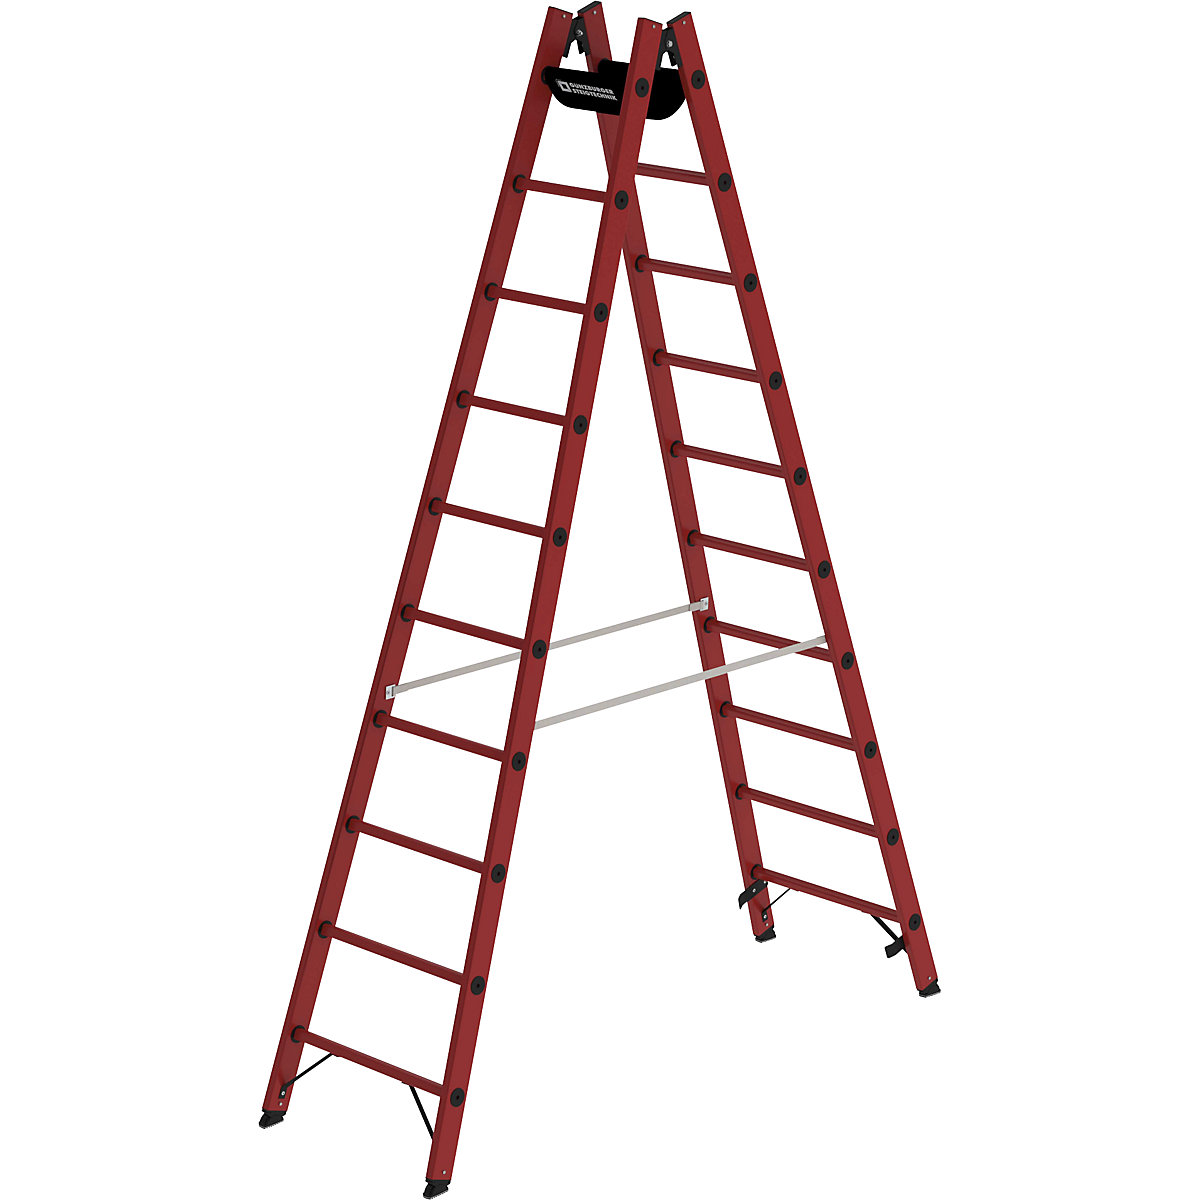 Solid plastic ladder – MUNK, made entirely of GRP, 2 x 10 rungs-6